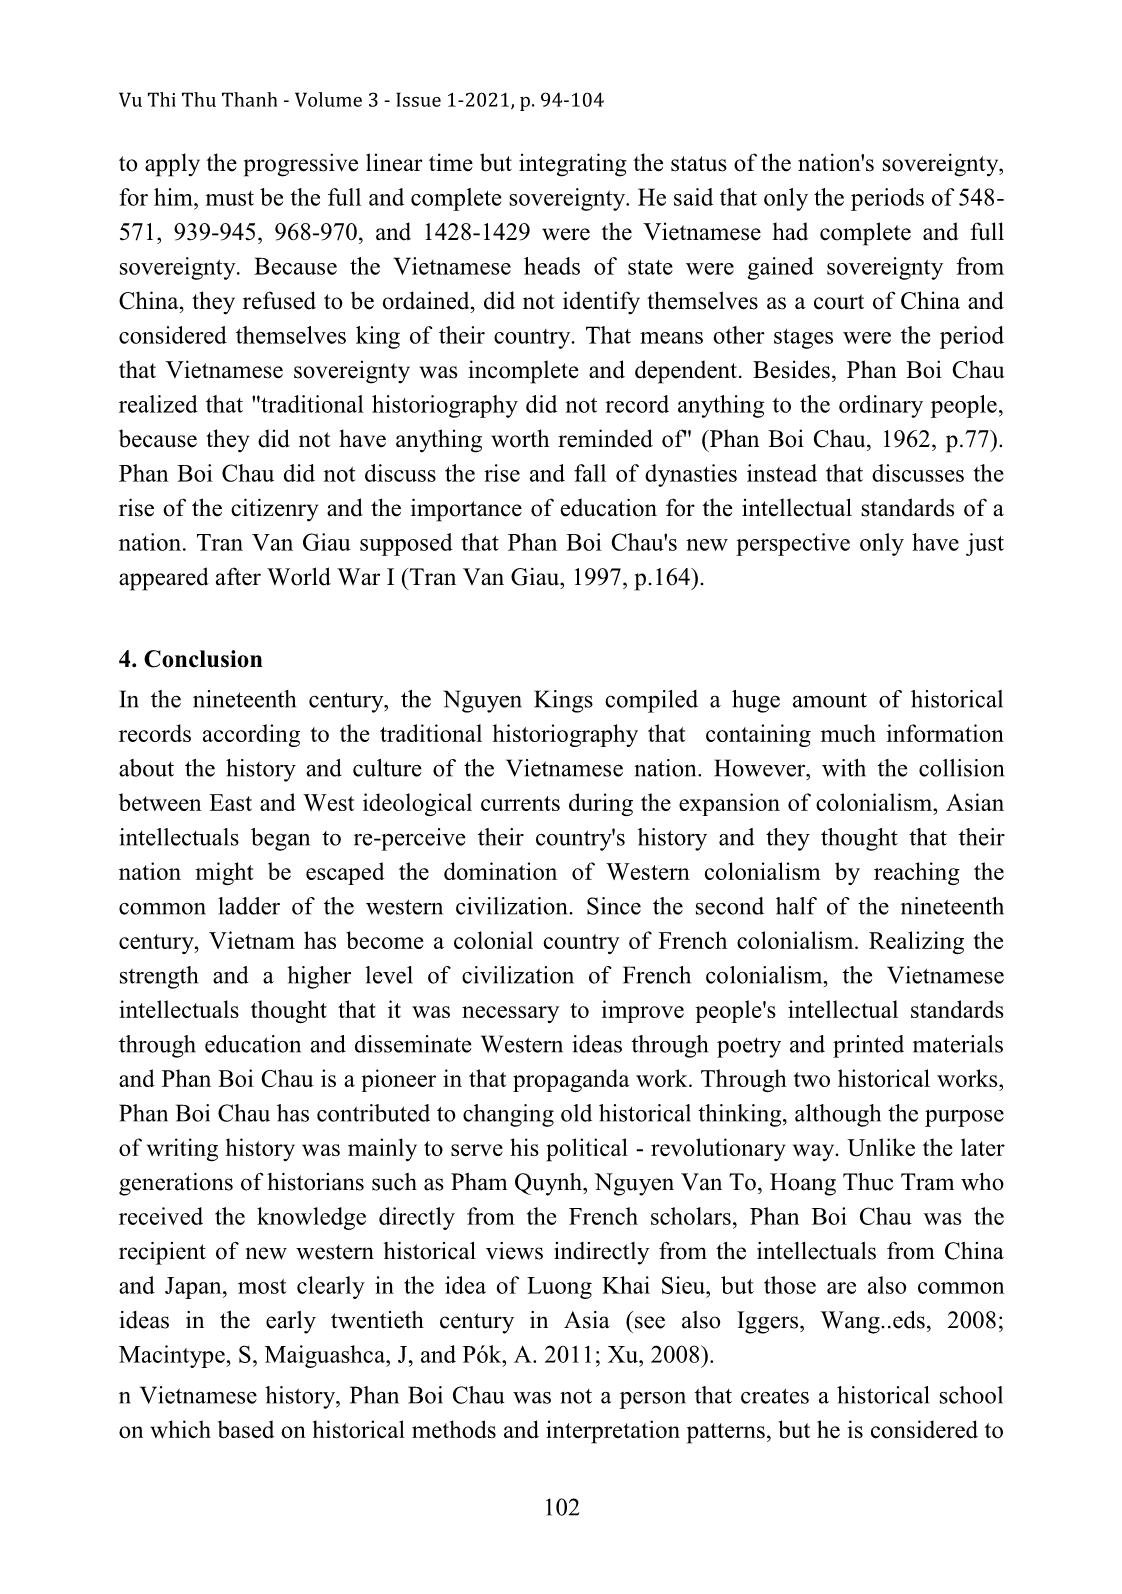 The Shift in historical perception from tradition to modern in Viet Nam in the early twentieth century trang 9